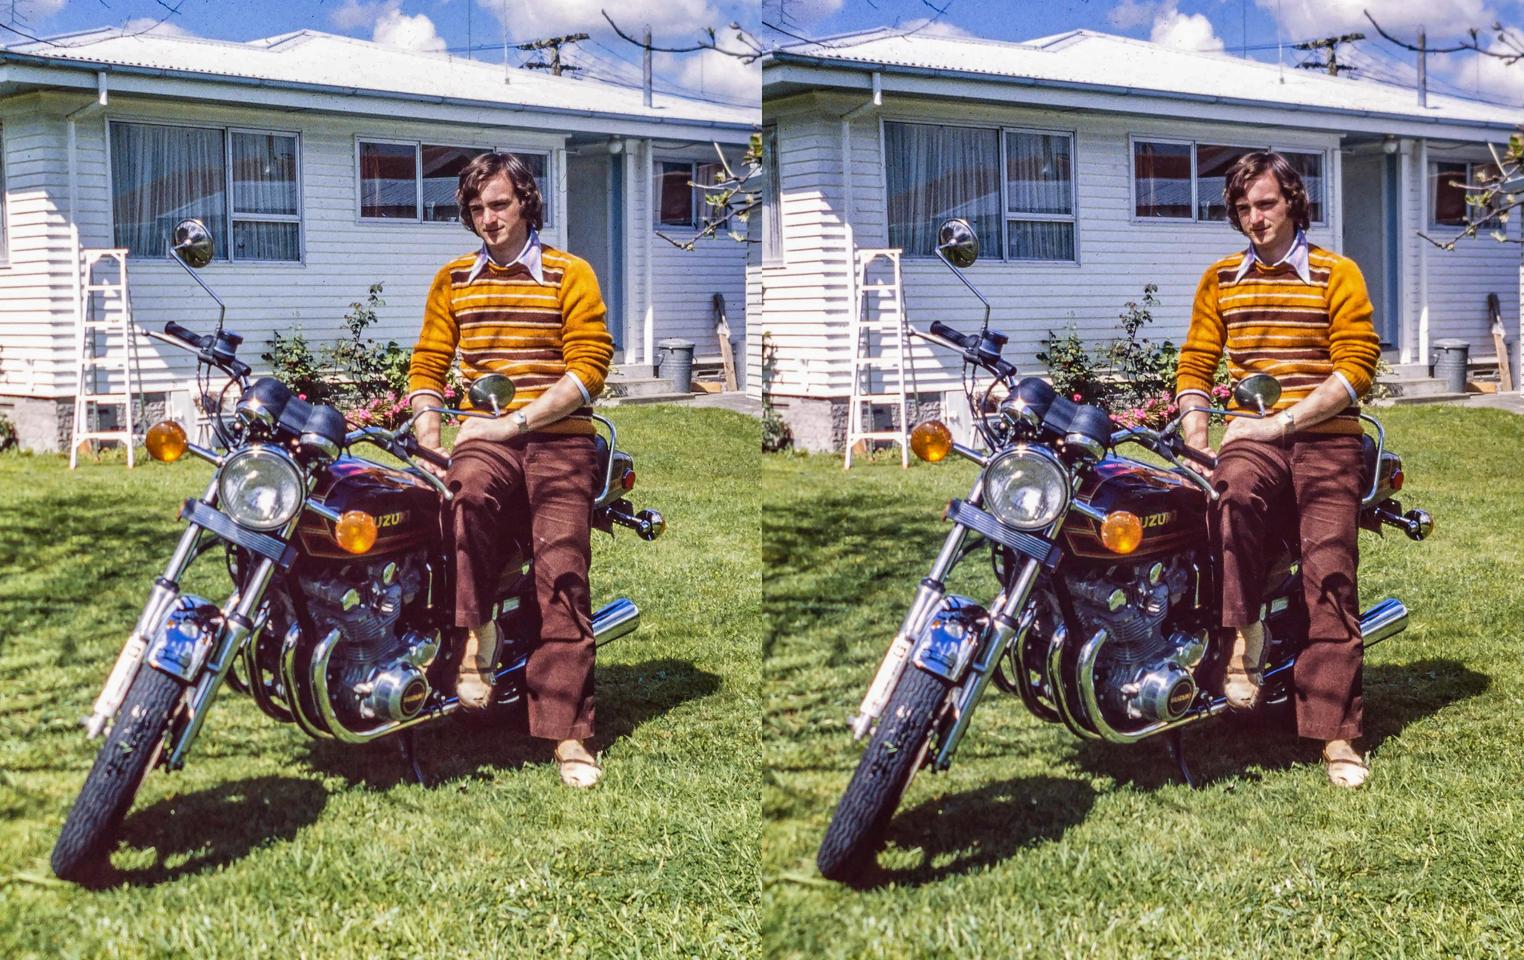 Me with new motorcycle 1979